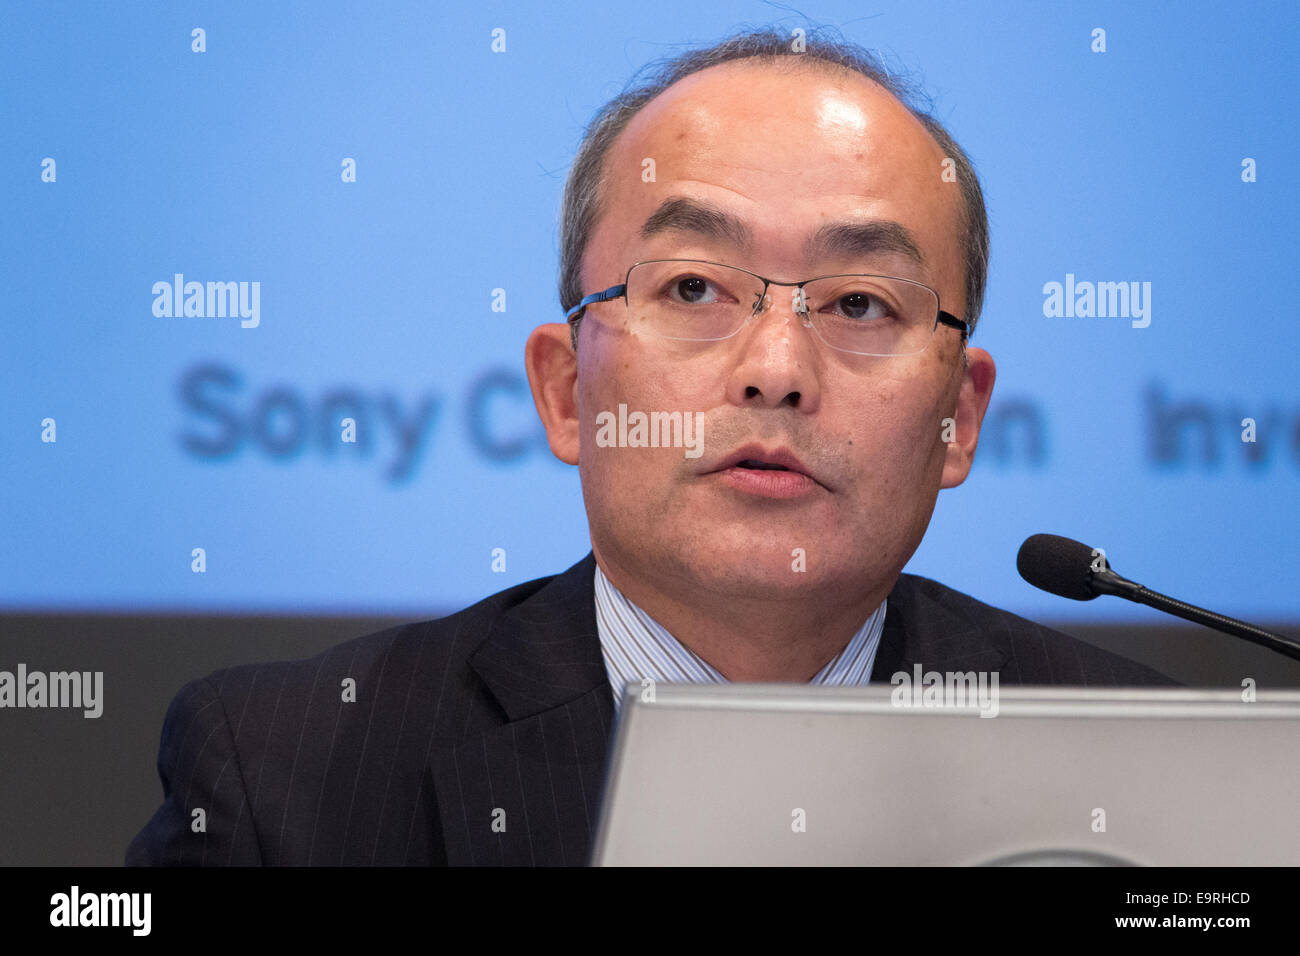 Hiroki Totoki, Sony Corp.&#39;s corporate Executive, attends an earnings announcement at Sony&#39;s head office in Tokyo on Friday, October 31, 2014 - tokyo-japan-31st-oct-2014-hiroki-totoki-sony-corps-corporate-executive-E9RHCD